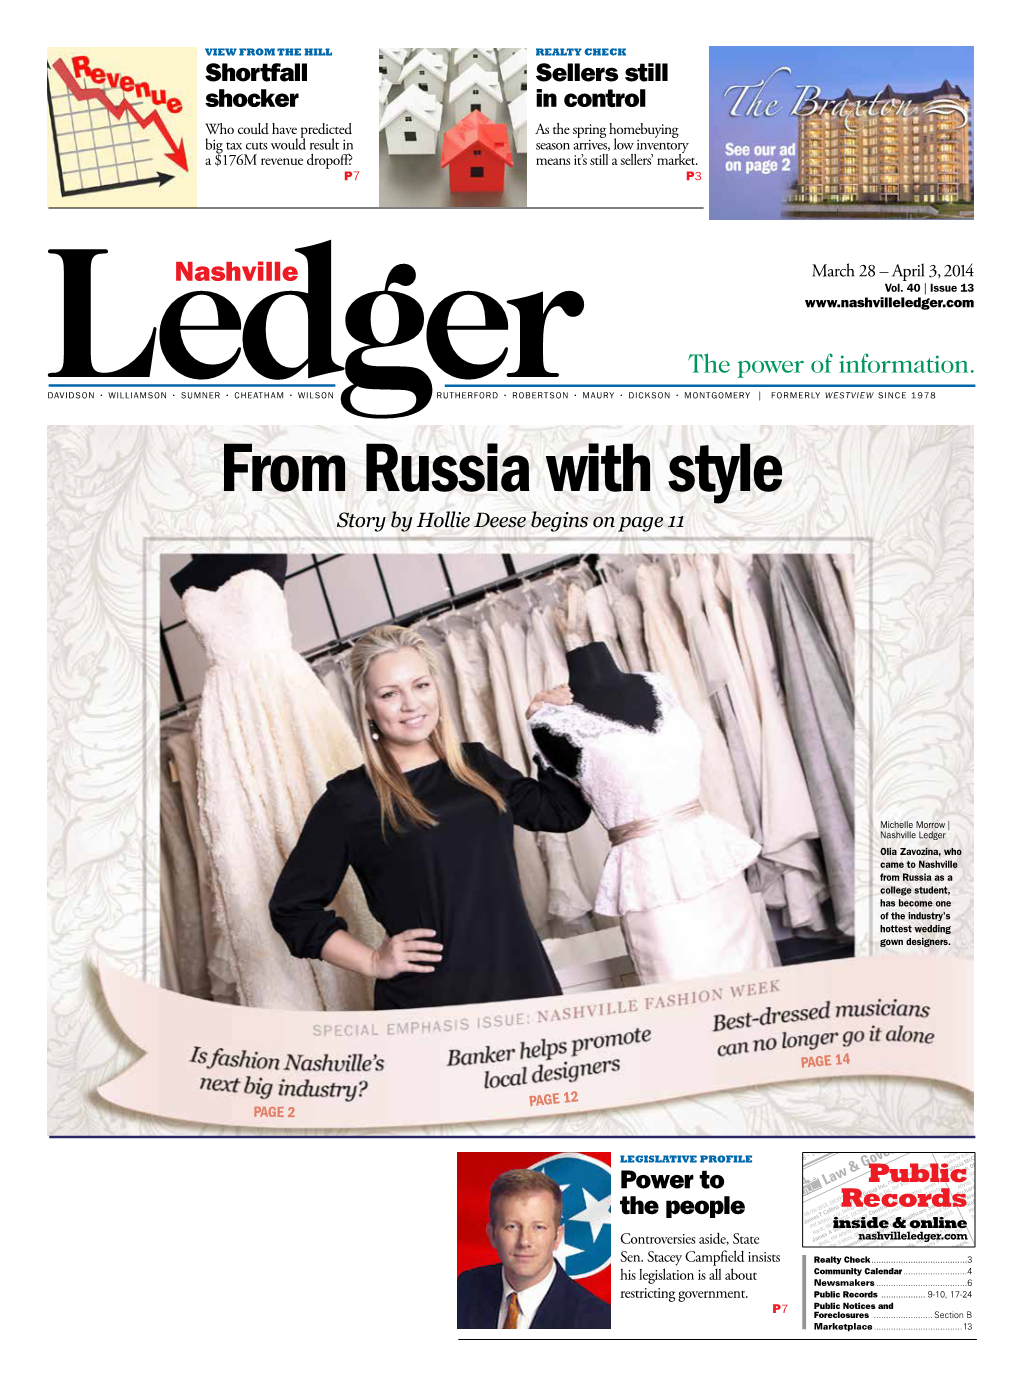 From Russia with Style Story by Hollie Deese Begins on Page 11